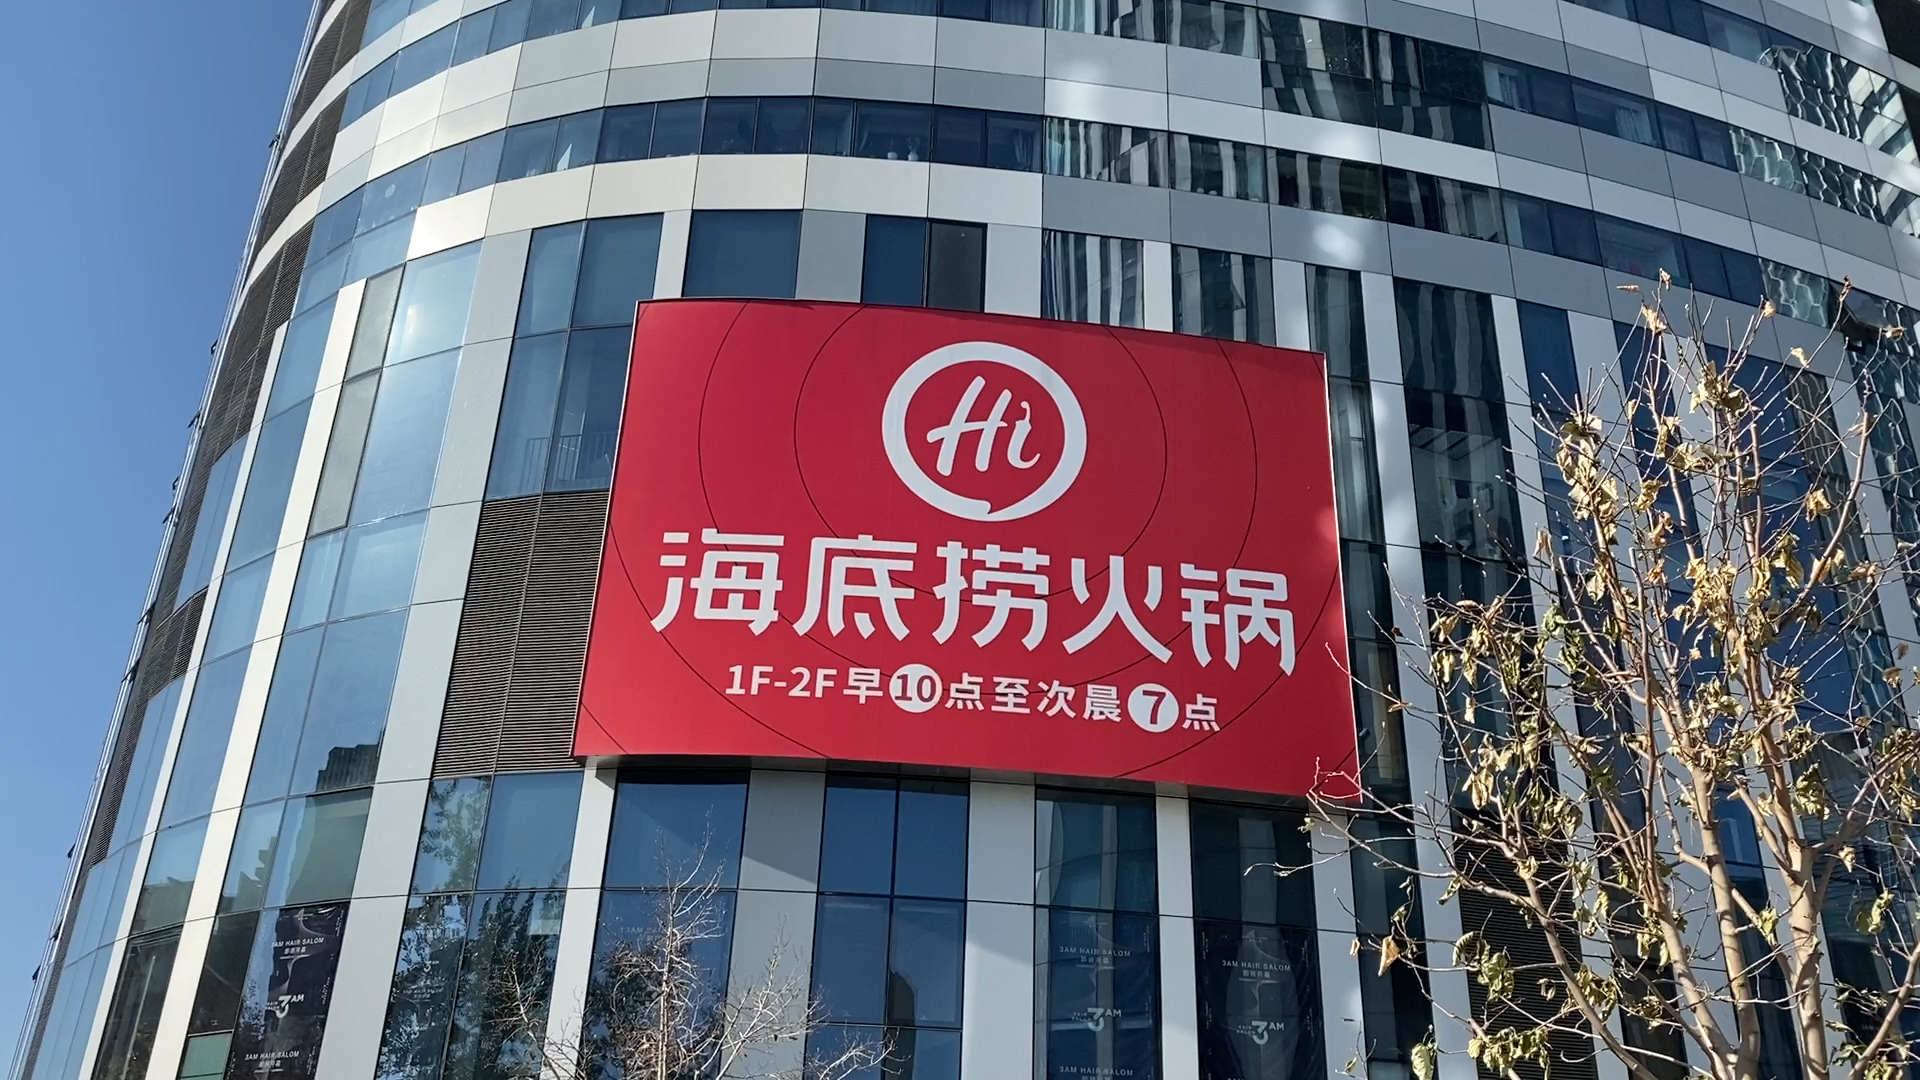 Video | This Chinese hot pot chain thinks like a tech company